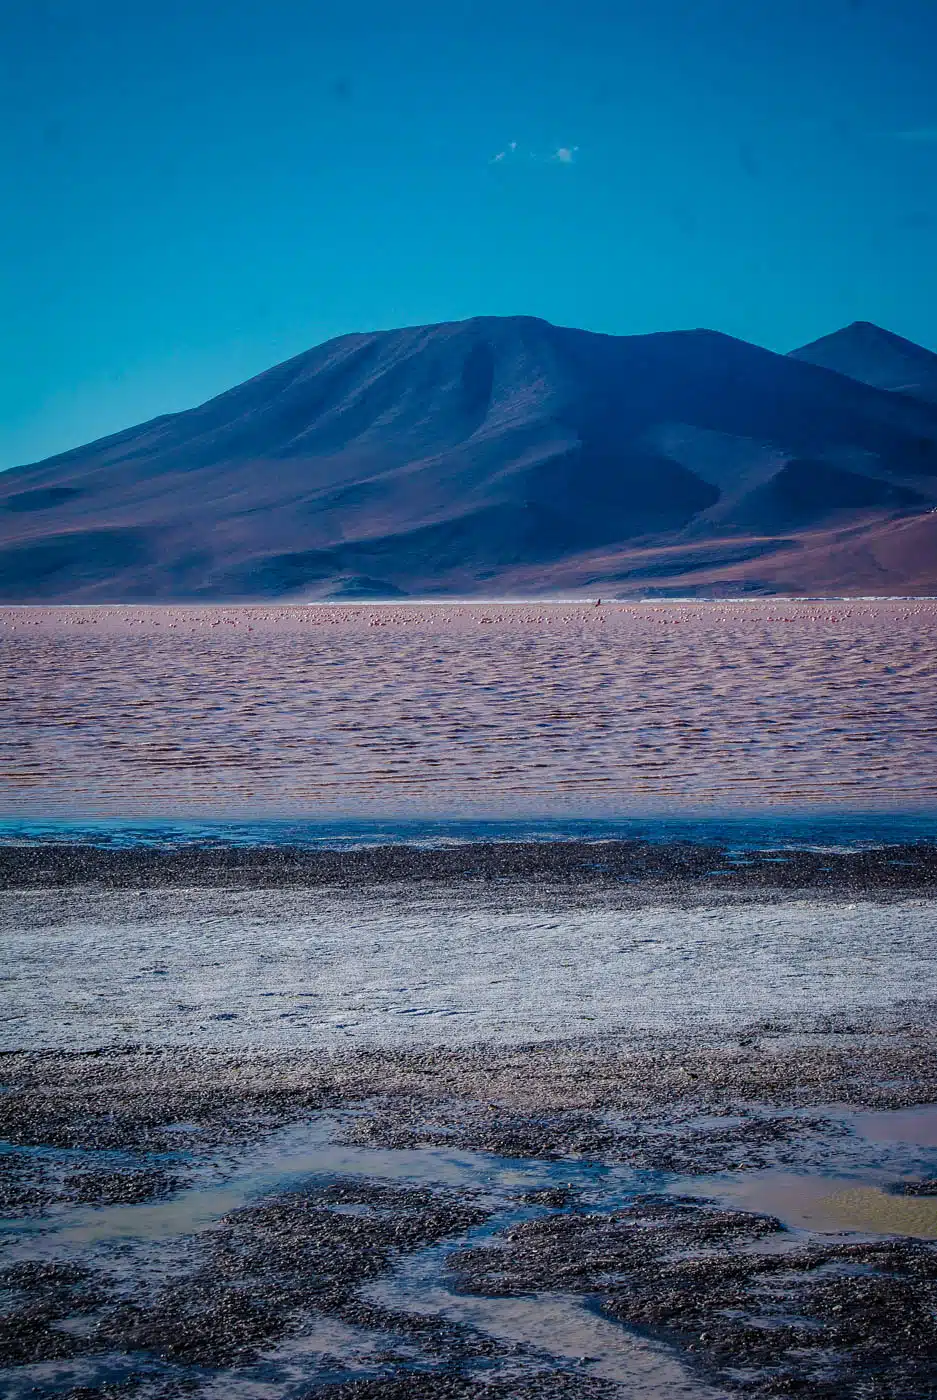 Laguna Colorada, Bolivia South America Travel Bucket List. 90 Awesome Things to do in South America When Backpacking and Travelling #southamerica #bucketlist #traveldestinations